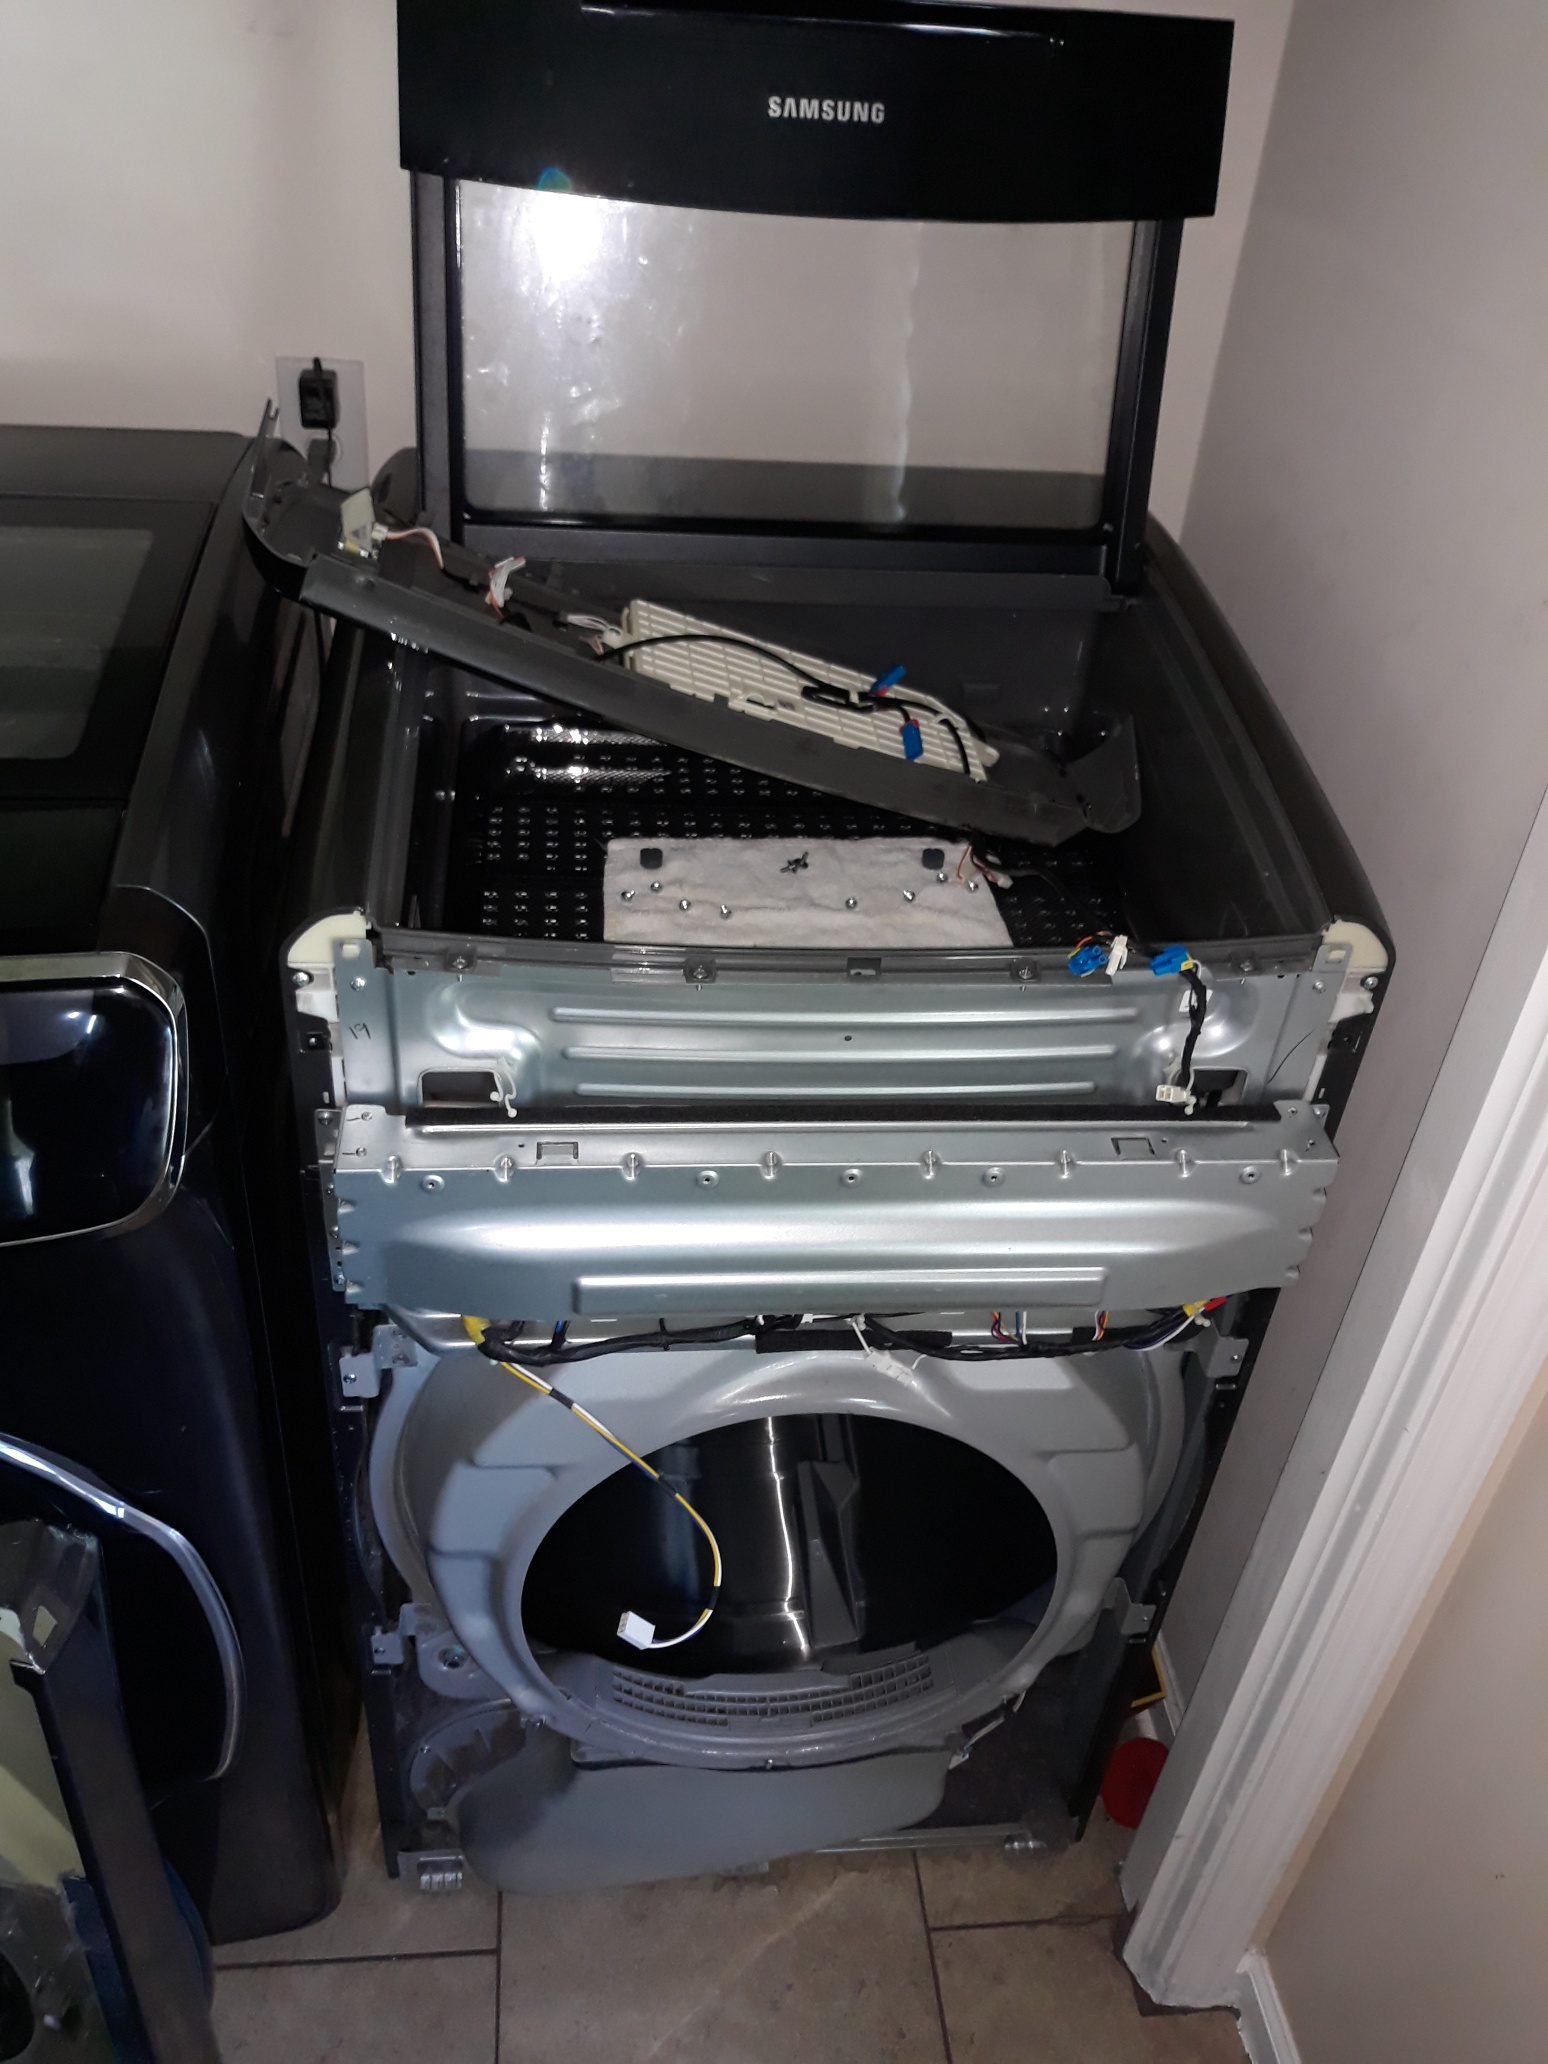 appliance repair dryer repair repair required replacement of the failed heating element that has an open circuit s quarters rd okahumpka fl 34762